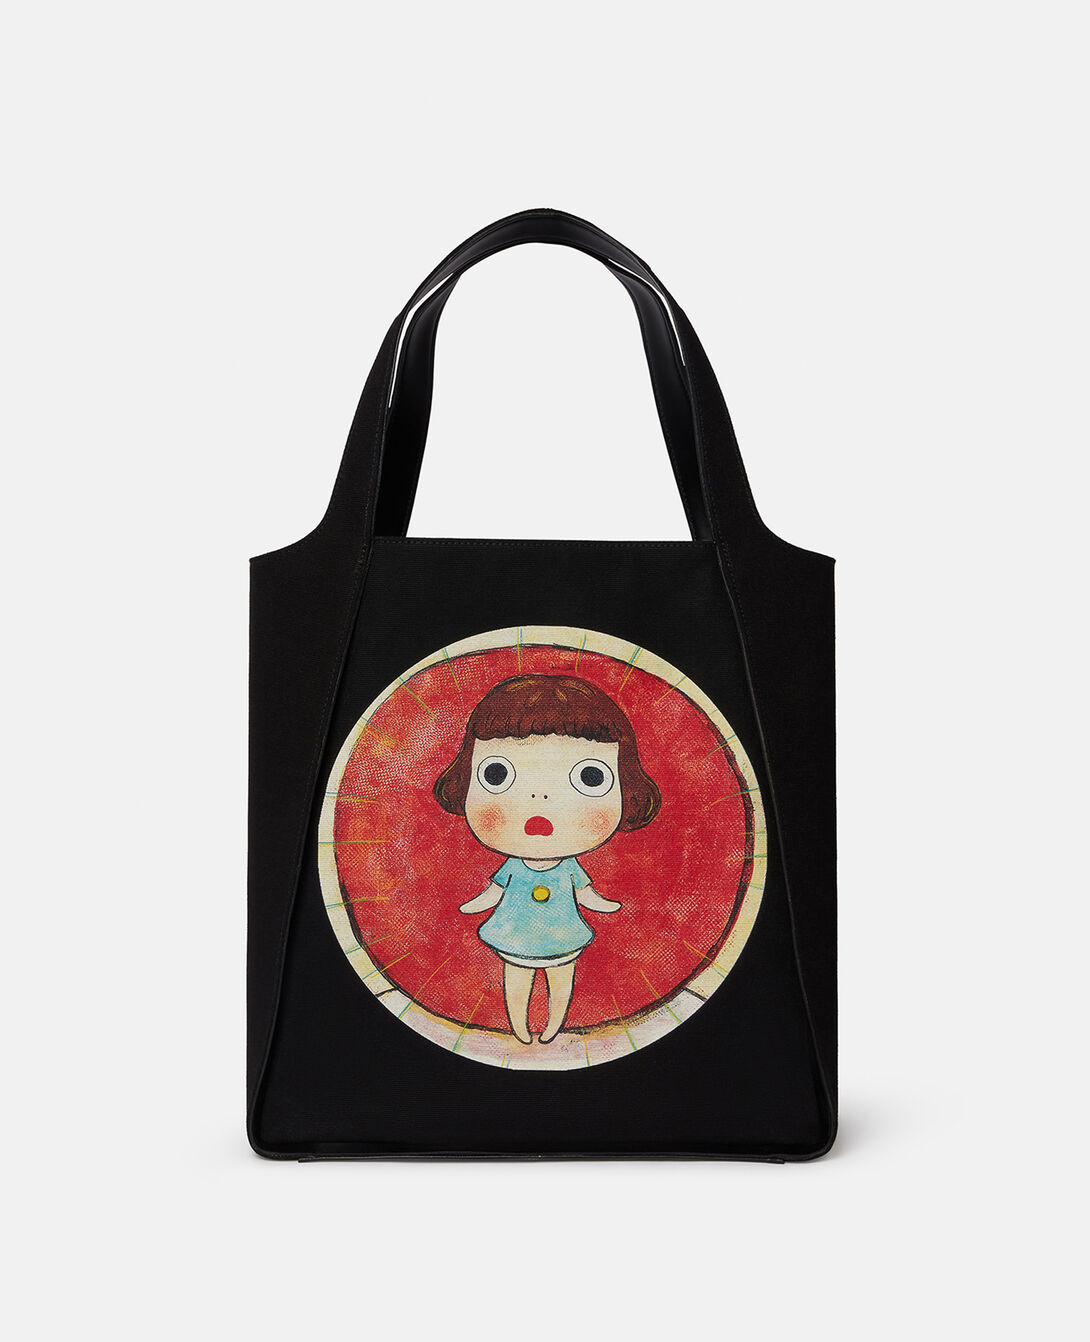 This Girl Can Black Cotton Tote Bag Canvas Tote Fashion 